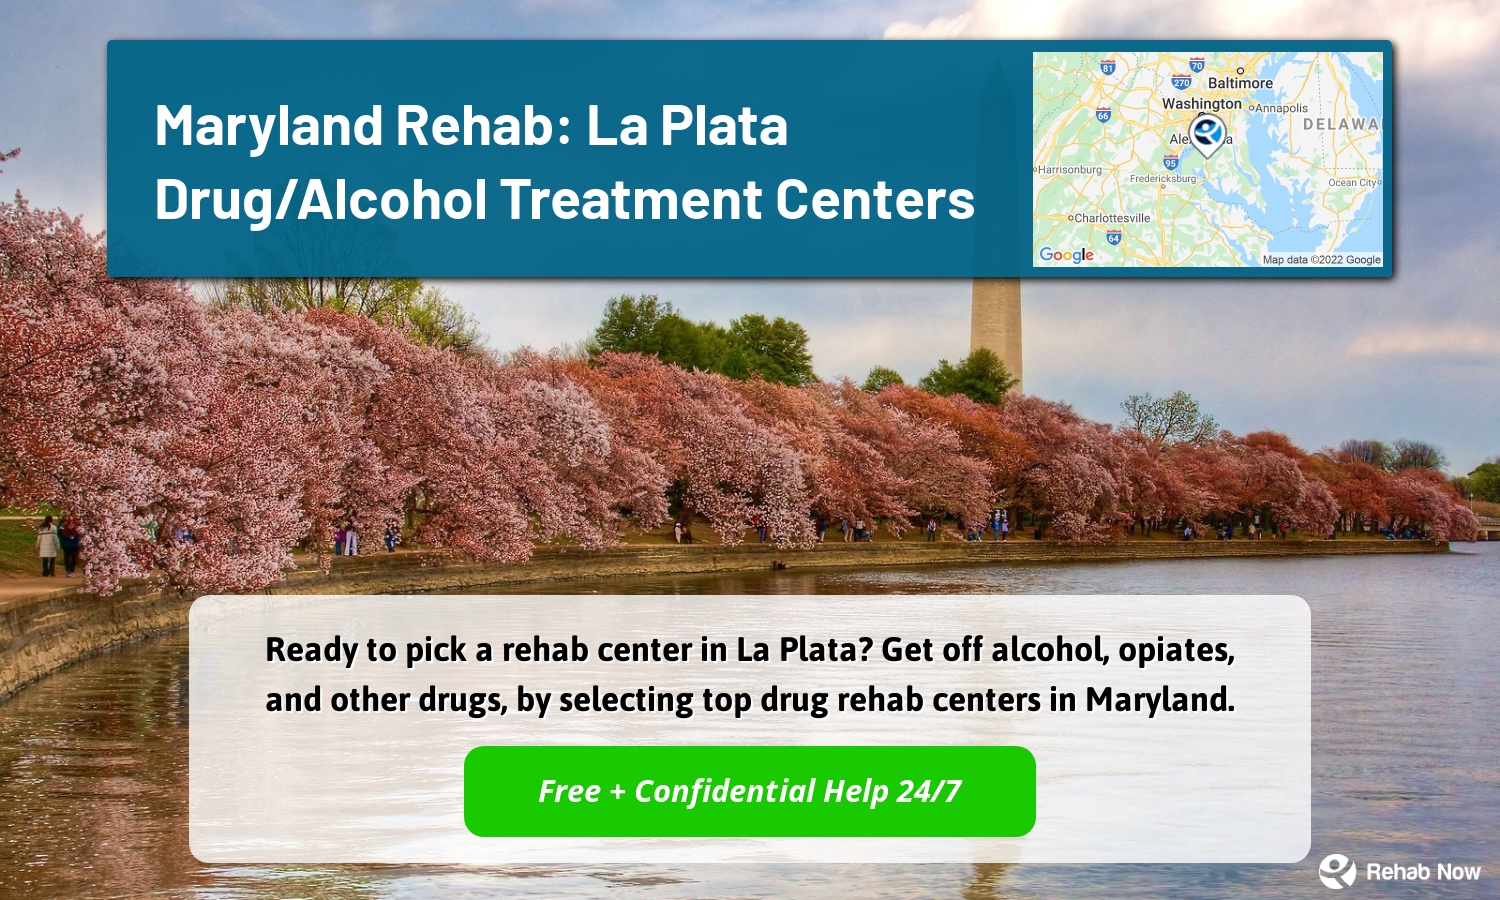 Ready to pick a rehab center in La Plata? Get off alcohol, opiates, and other drugs, by selecting top drug rehab centers in Maryland.